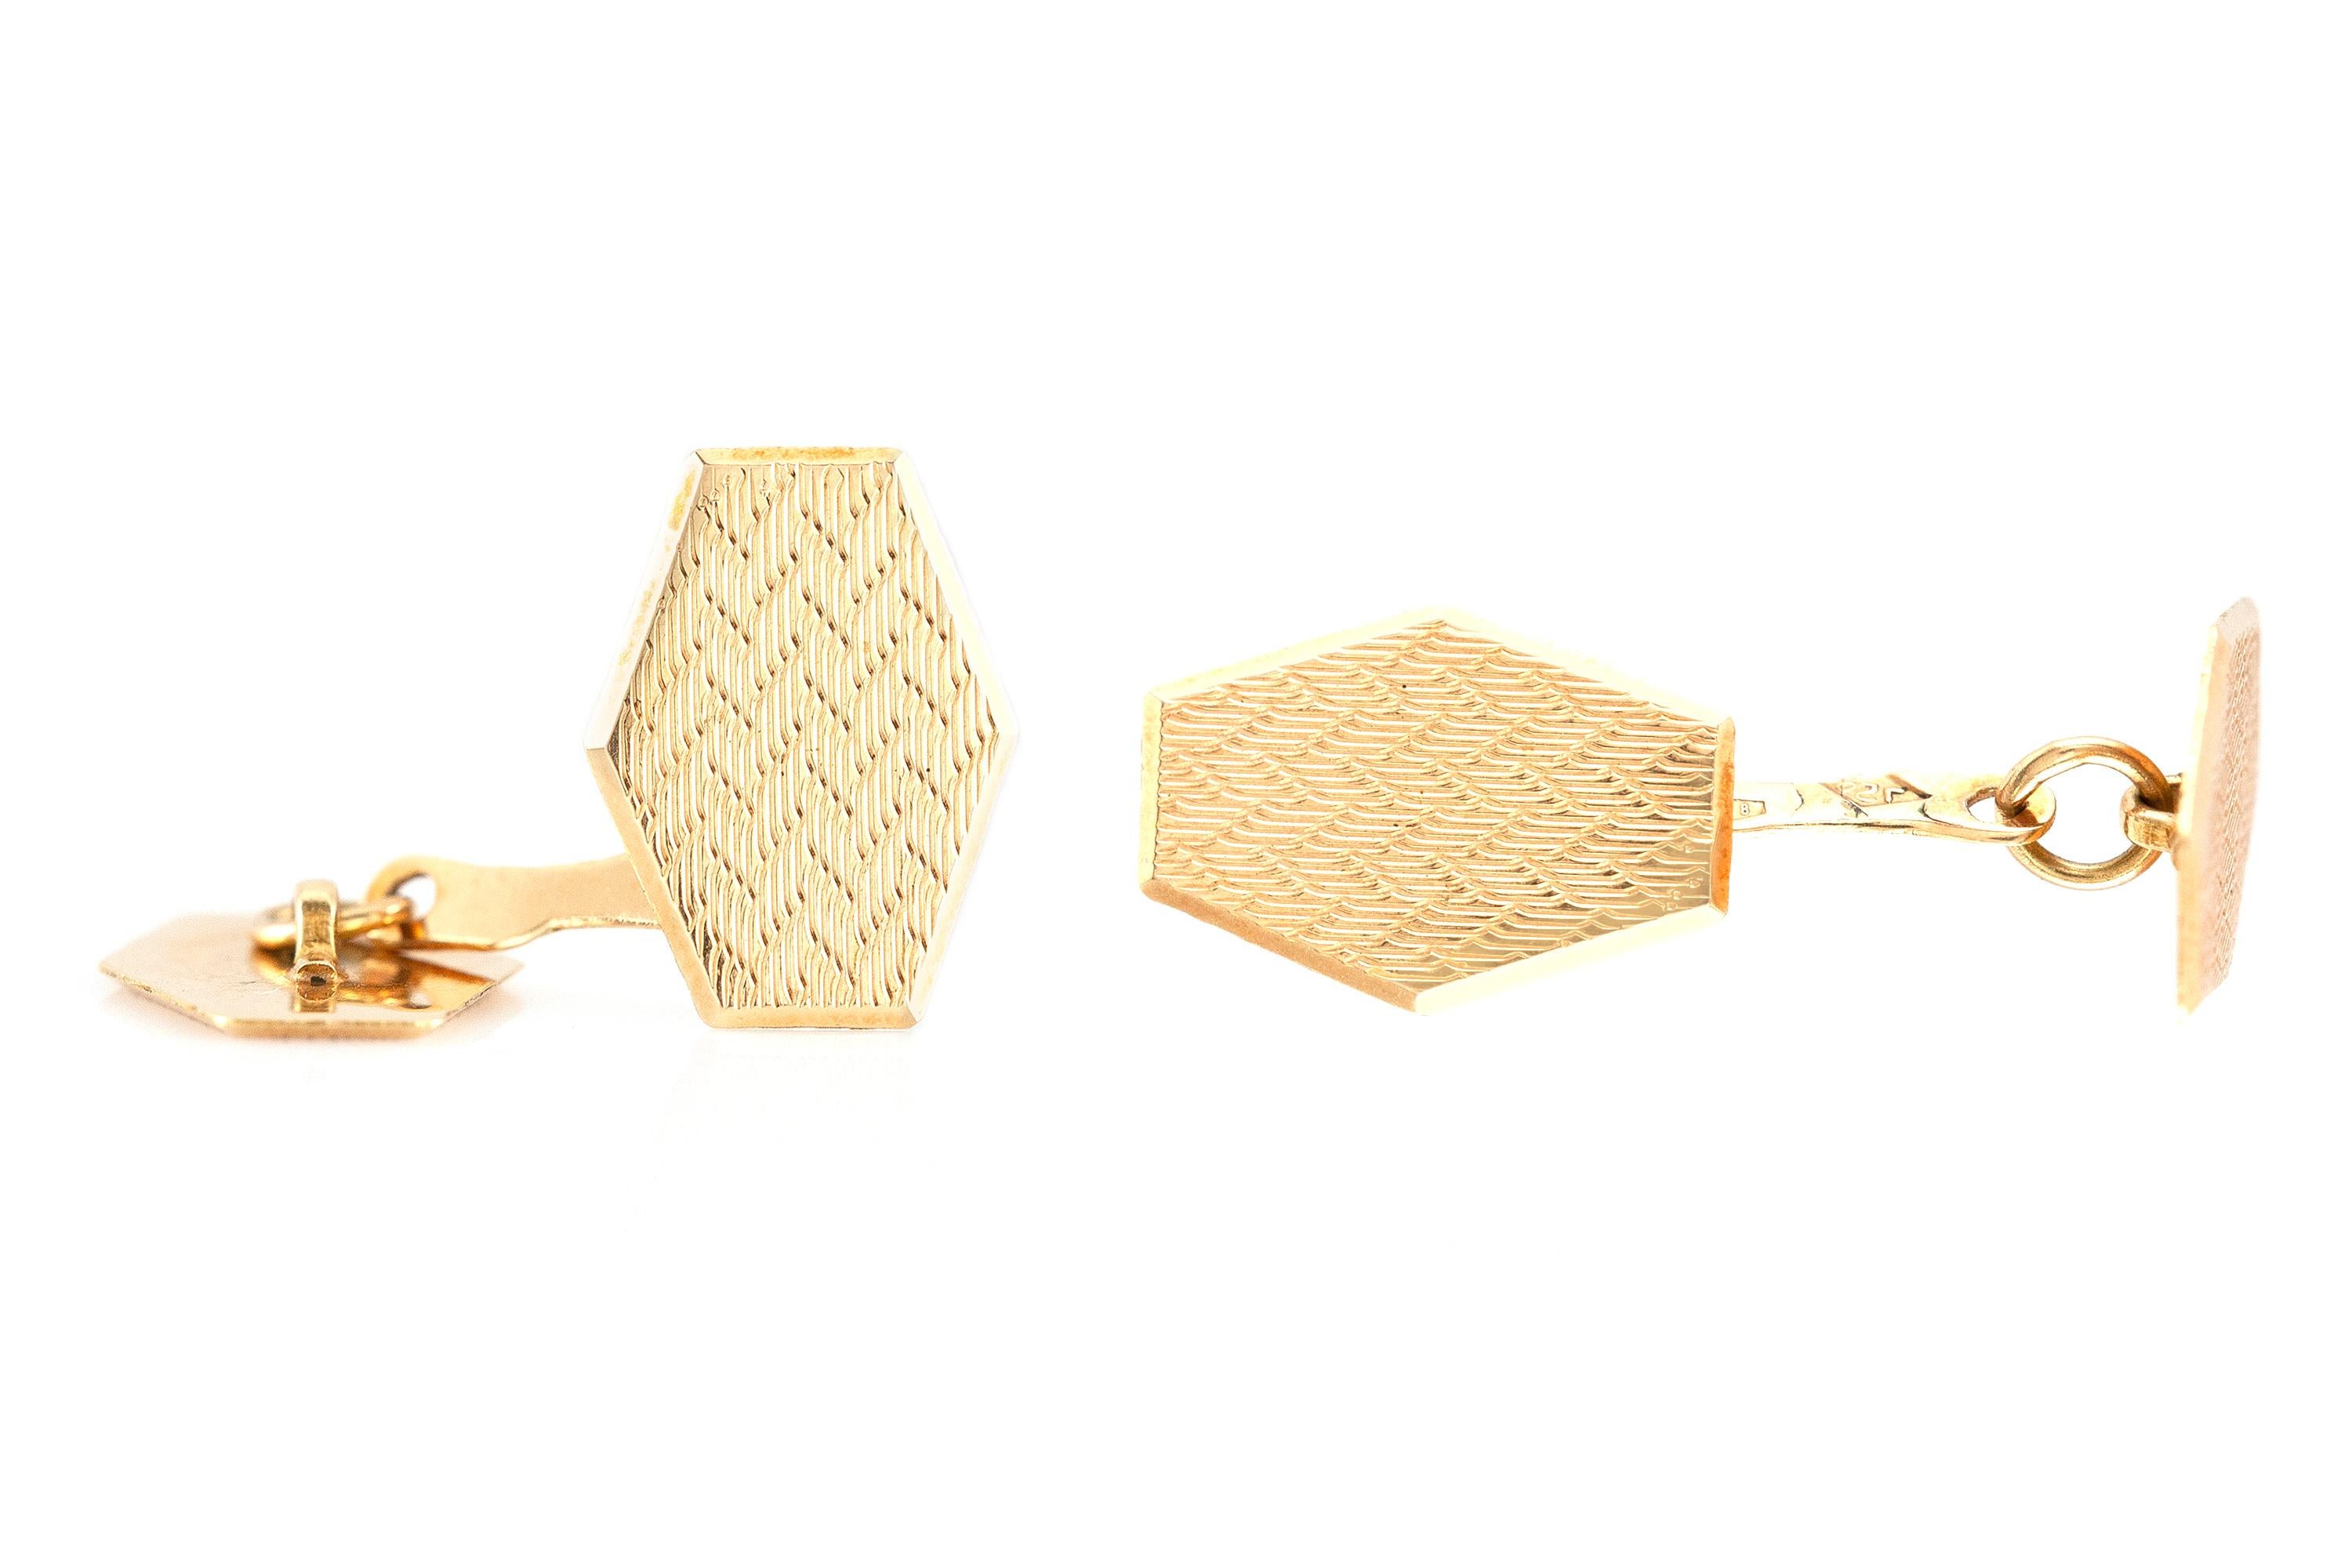 Cufflinks finely crafted in 18k yellow gold, weighing 3.6 dwt., size of each cufflink is 0.70 inch. Circa 1980.

